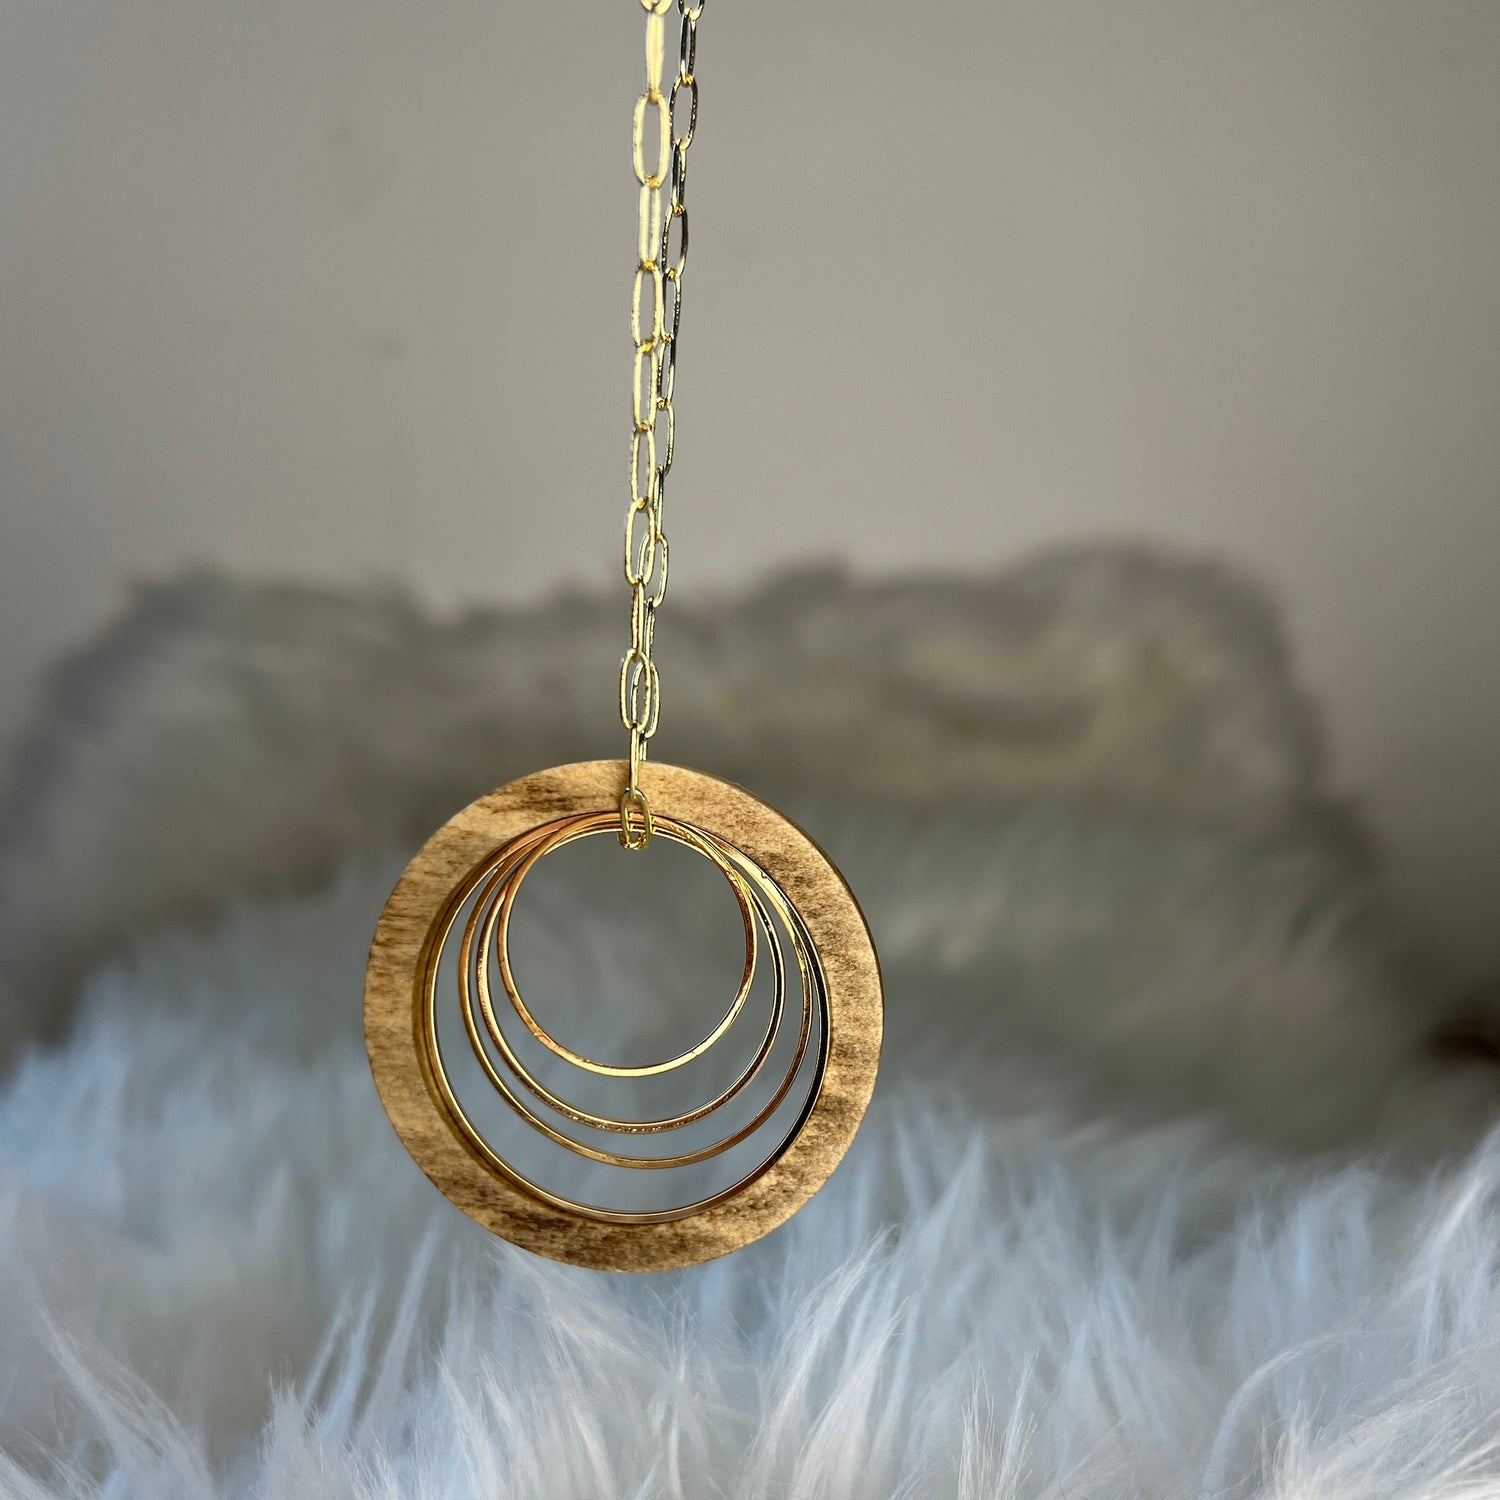 Circles Necklace by Madera Design Studio